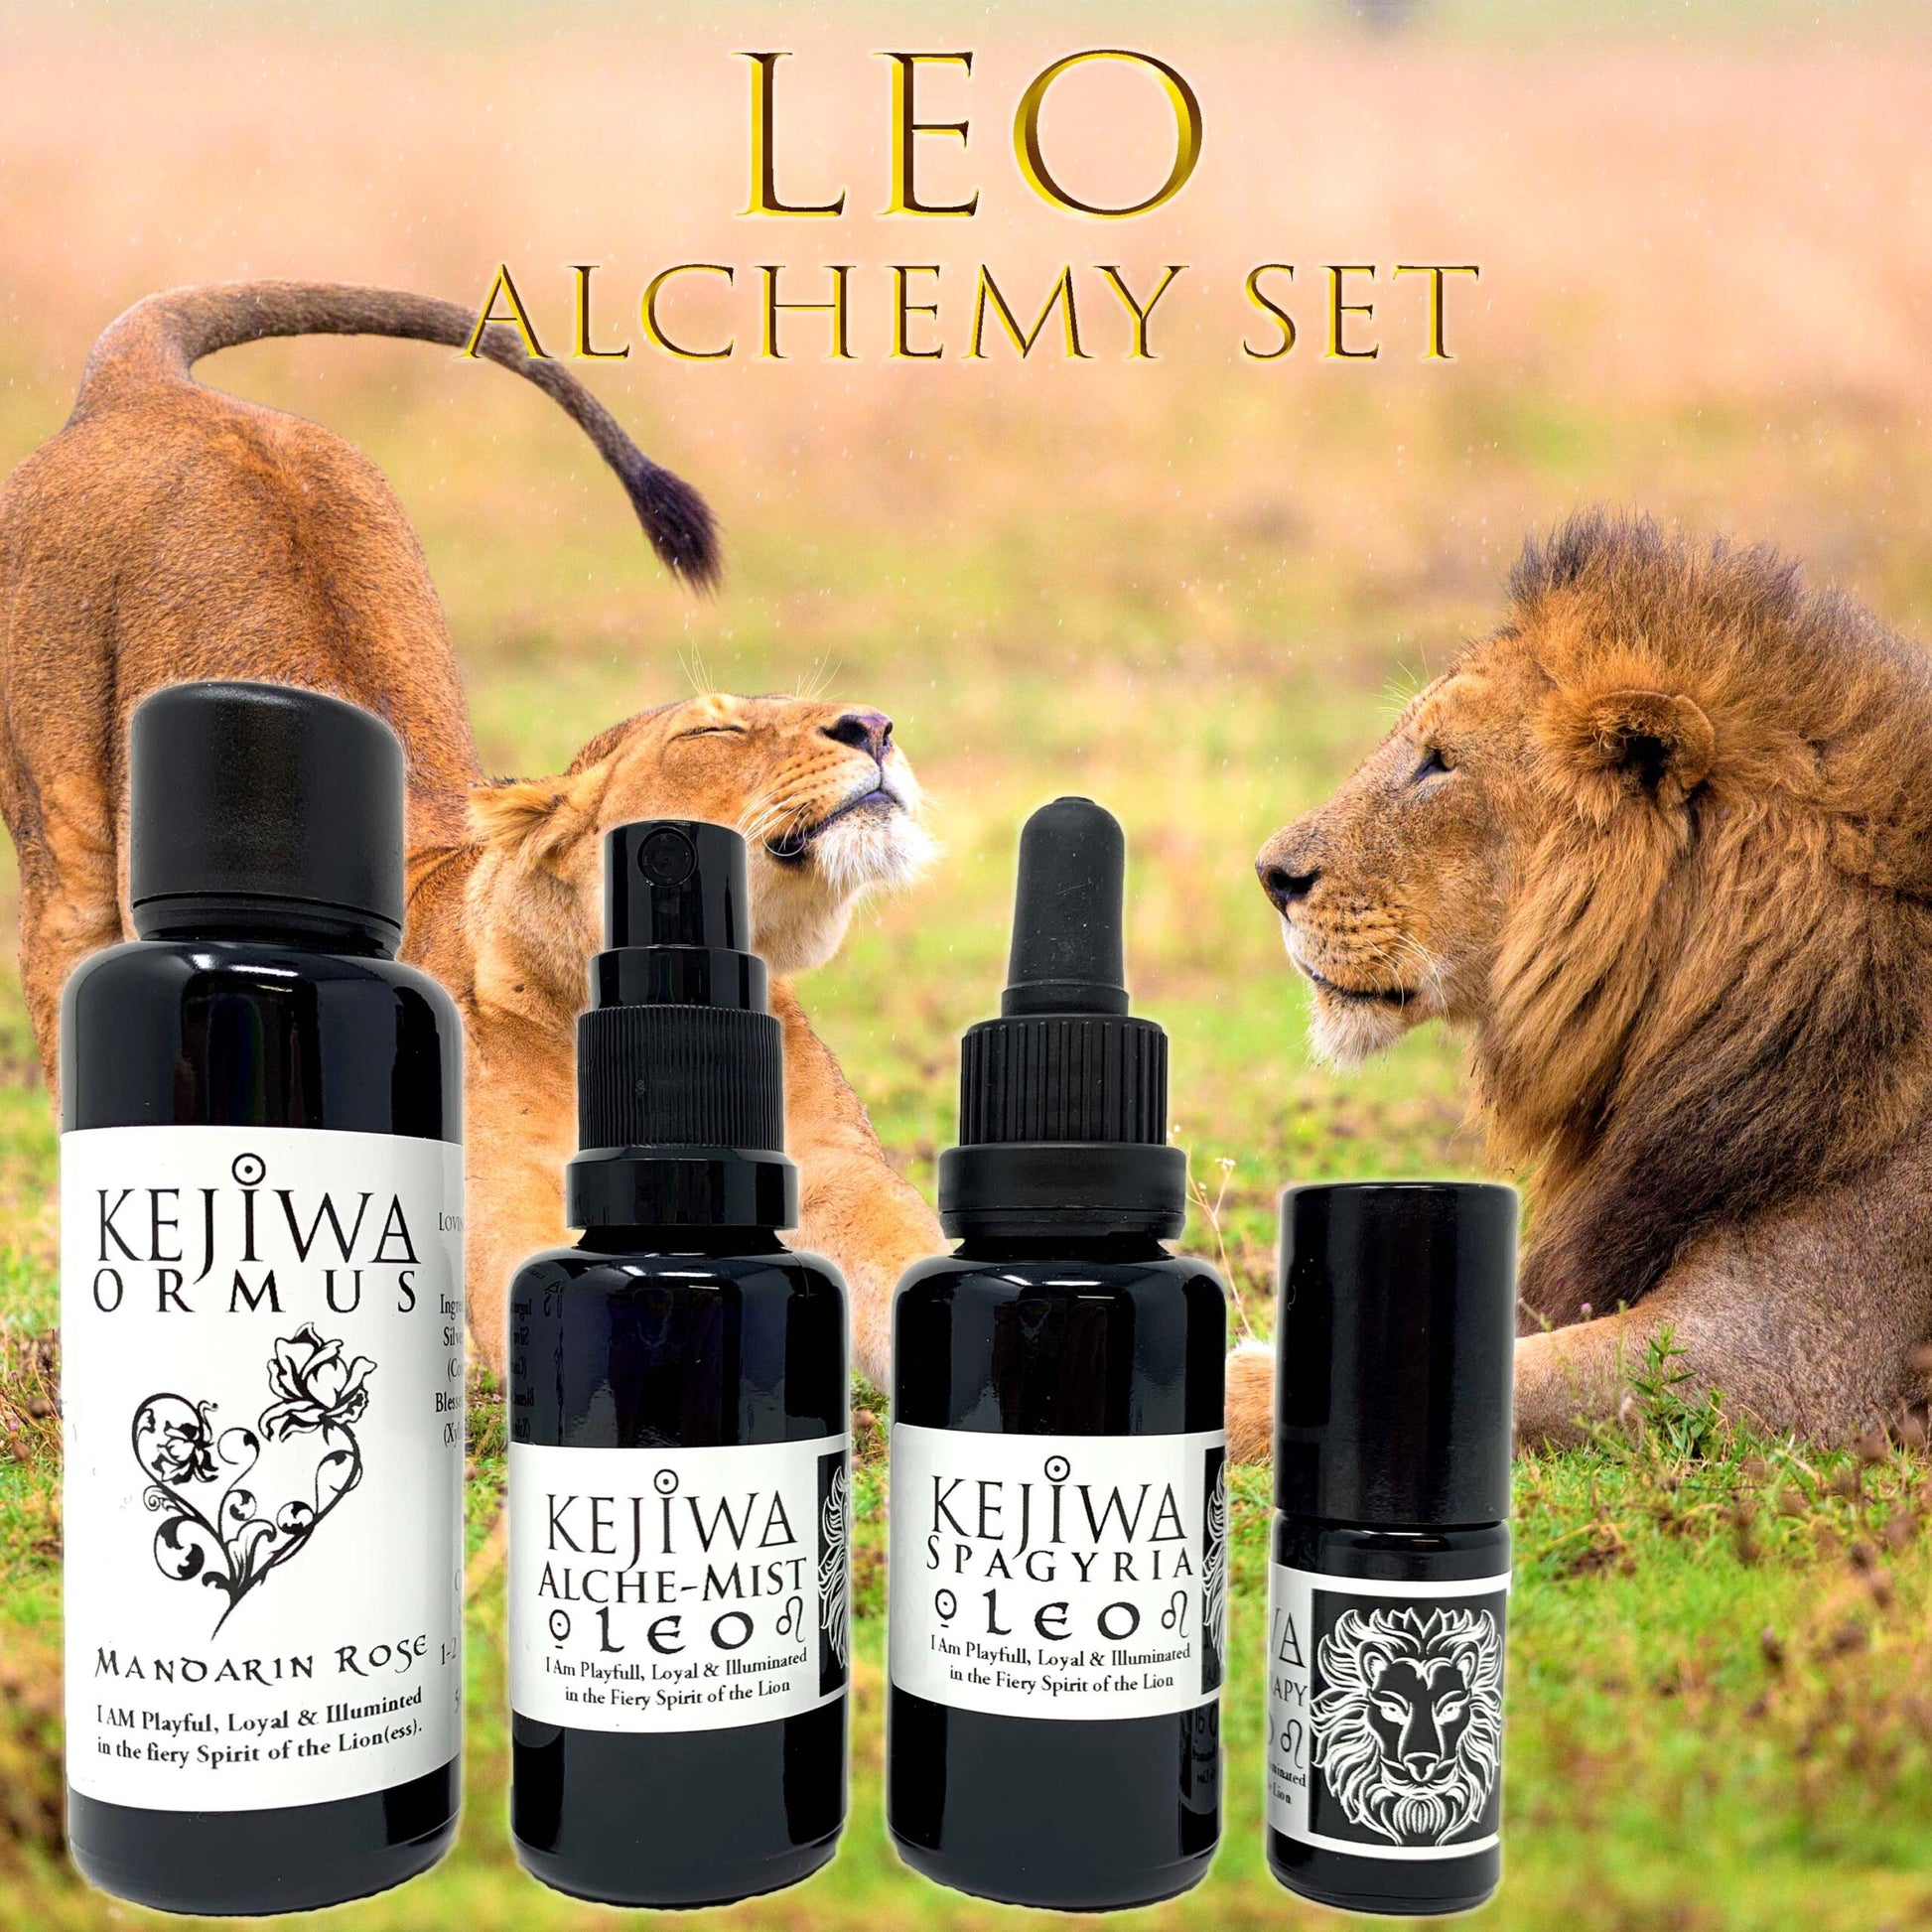 Leo Alchemy set in Violet bottles with lion and Lioness